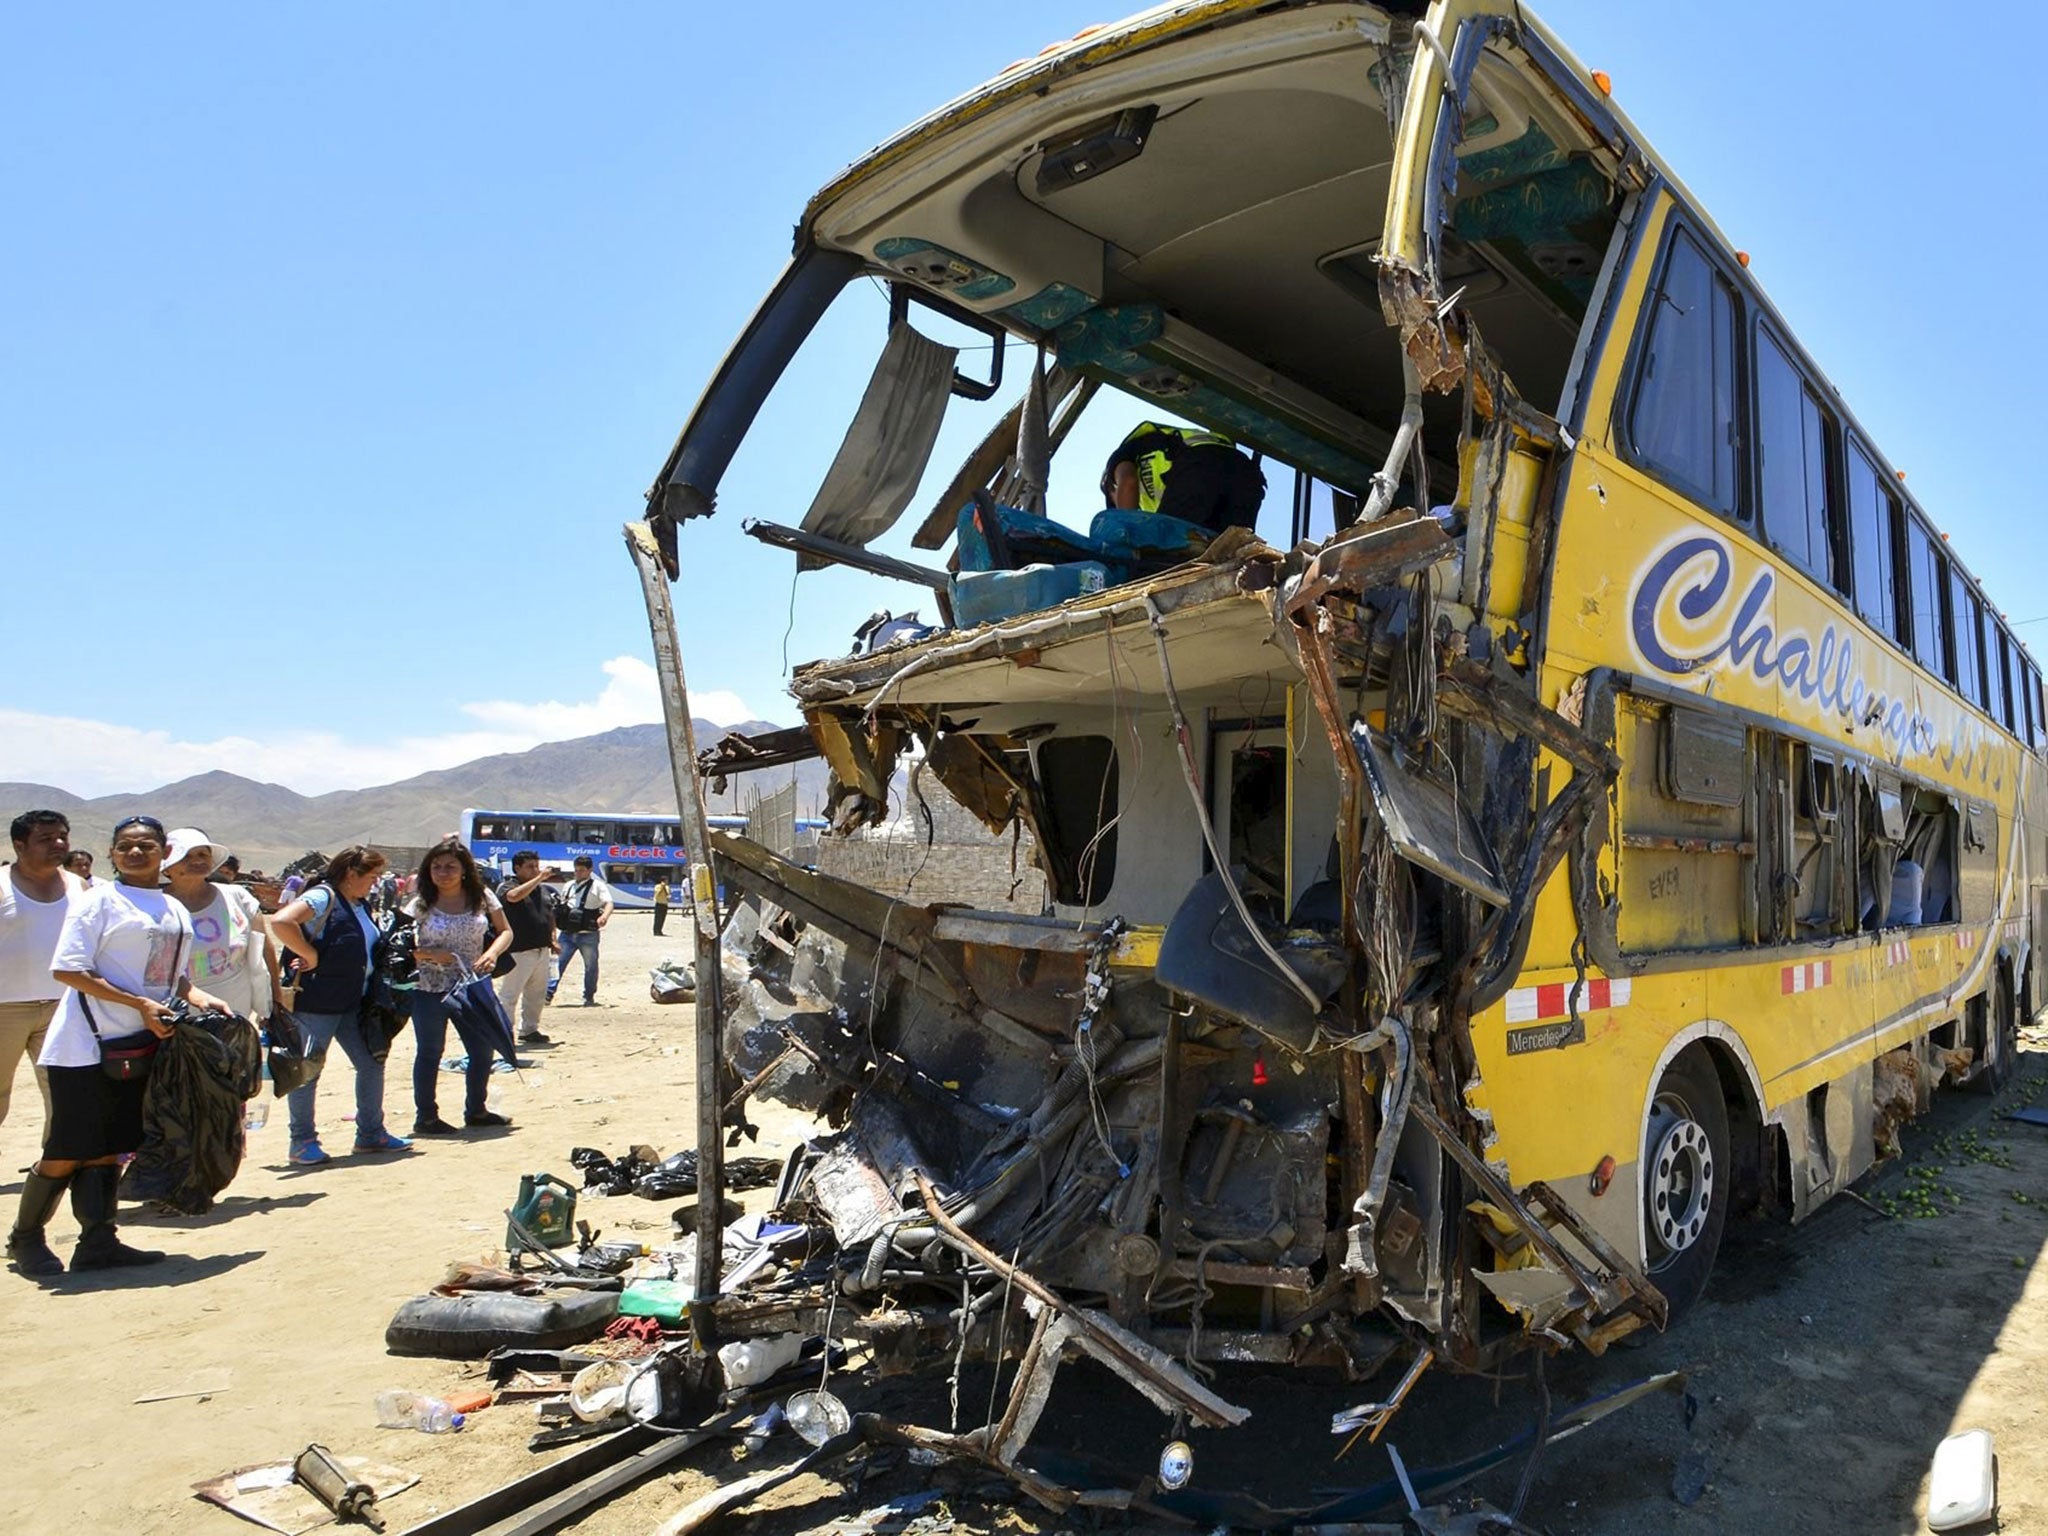 At least 34 people were killed and 70 injured in north-central Peru after a bus swerved into another bus in the oncoming lane in a multiple-vehicle accident